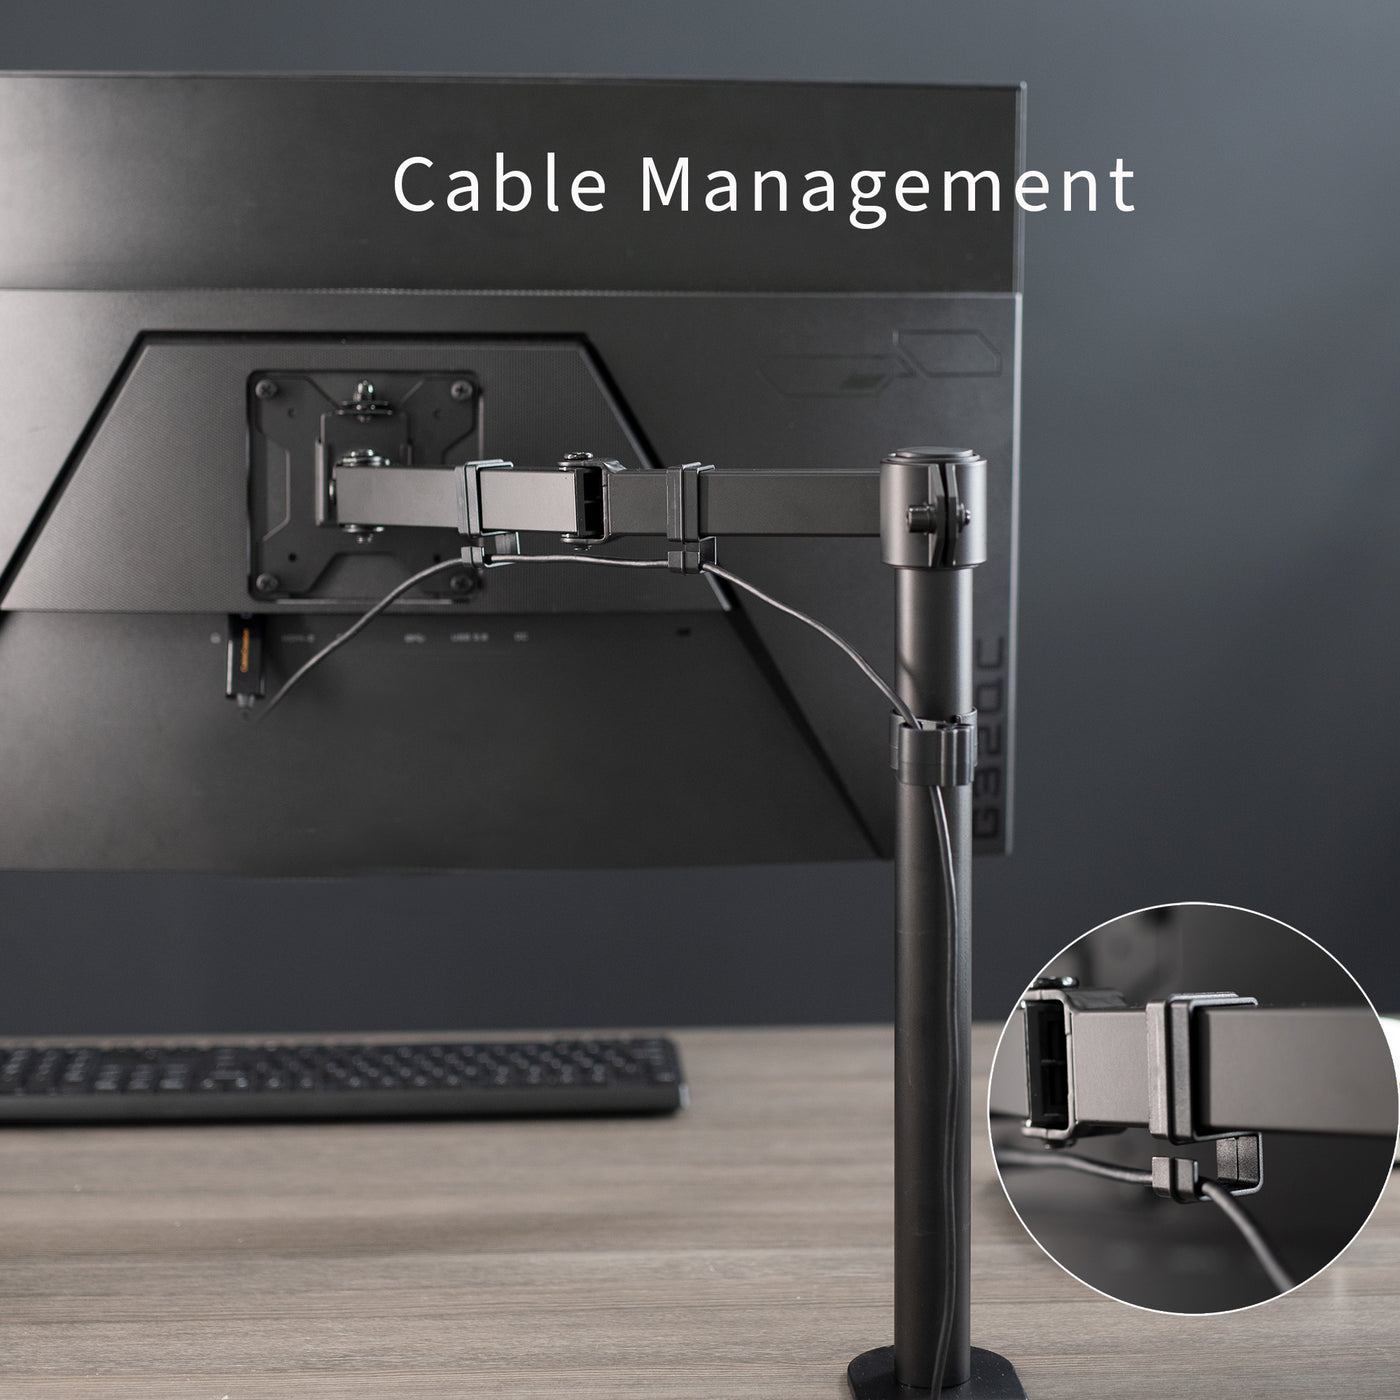 Cable management is provided along the arm and pole of the mount to maintain a tidy workspace.